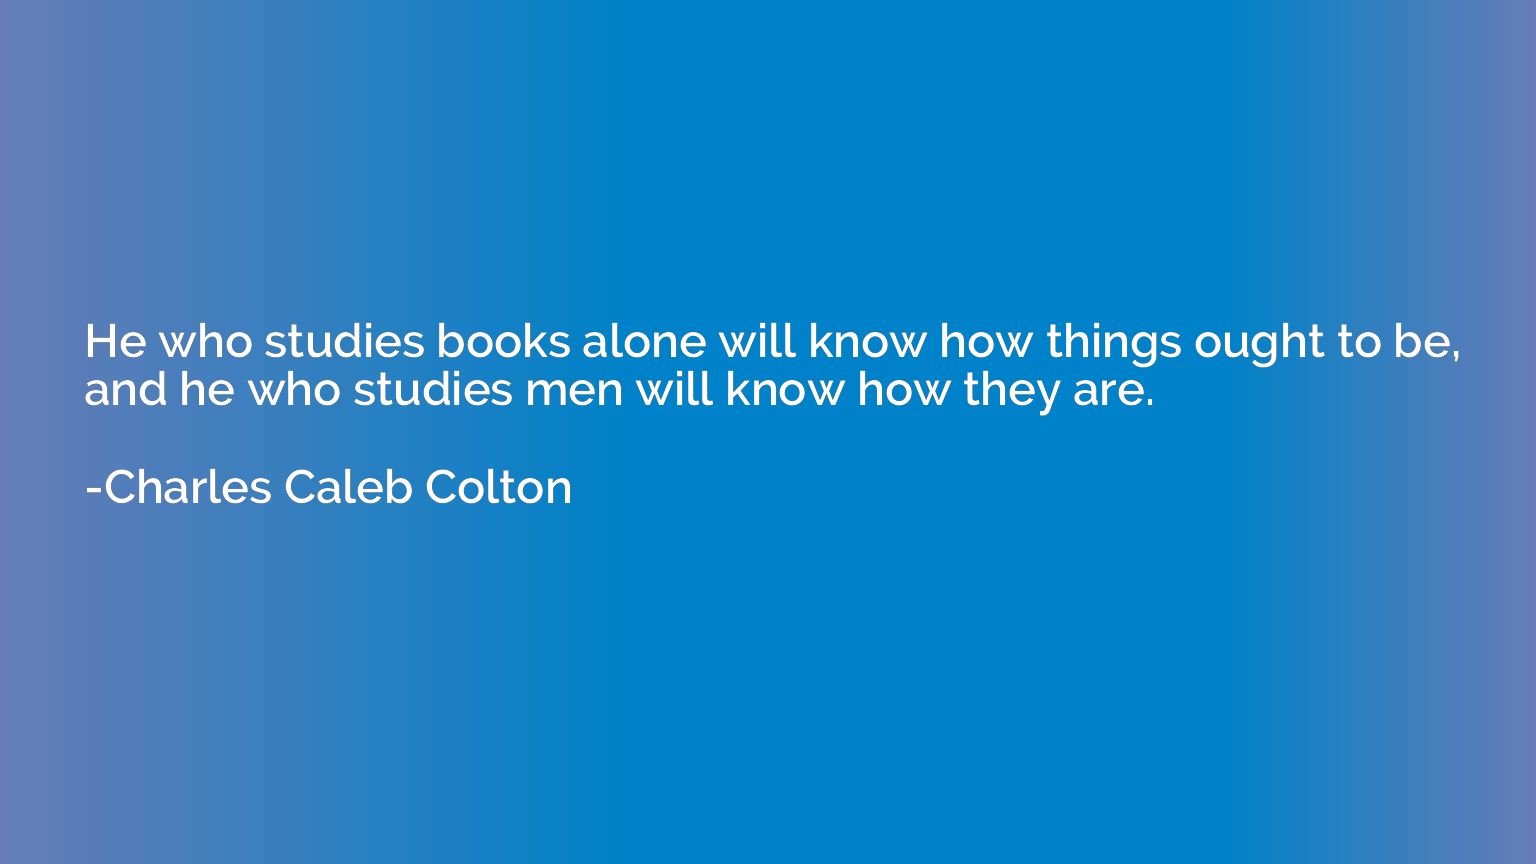 He who studies books alone will know how things ought to be,